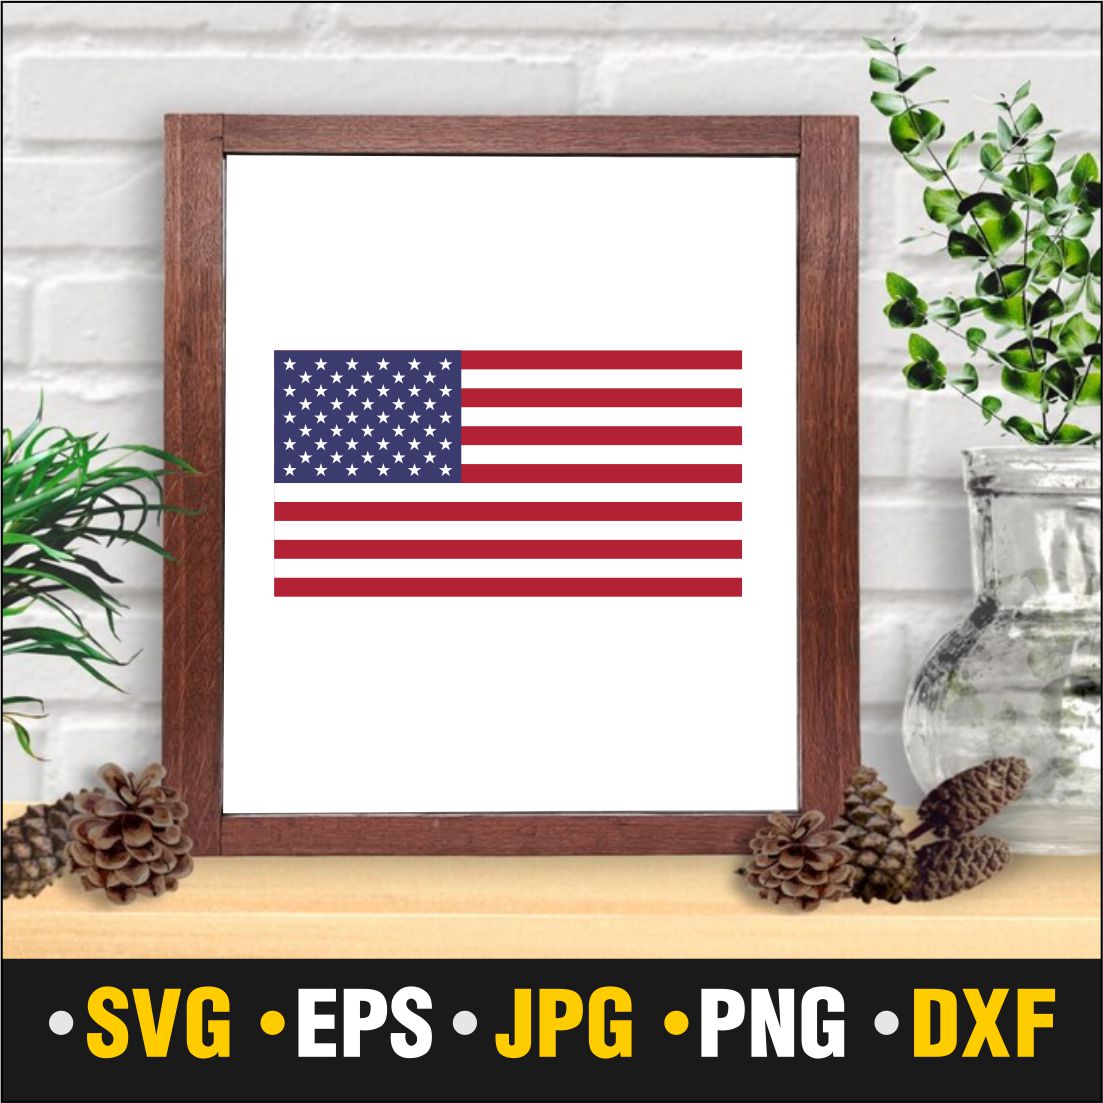 American Flag SVG, JPG , PNG, DXF, EPS cover image.